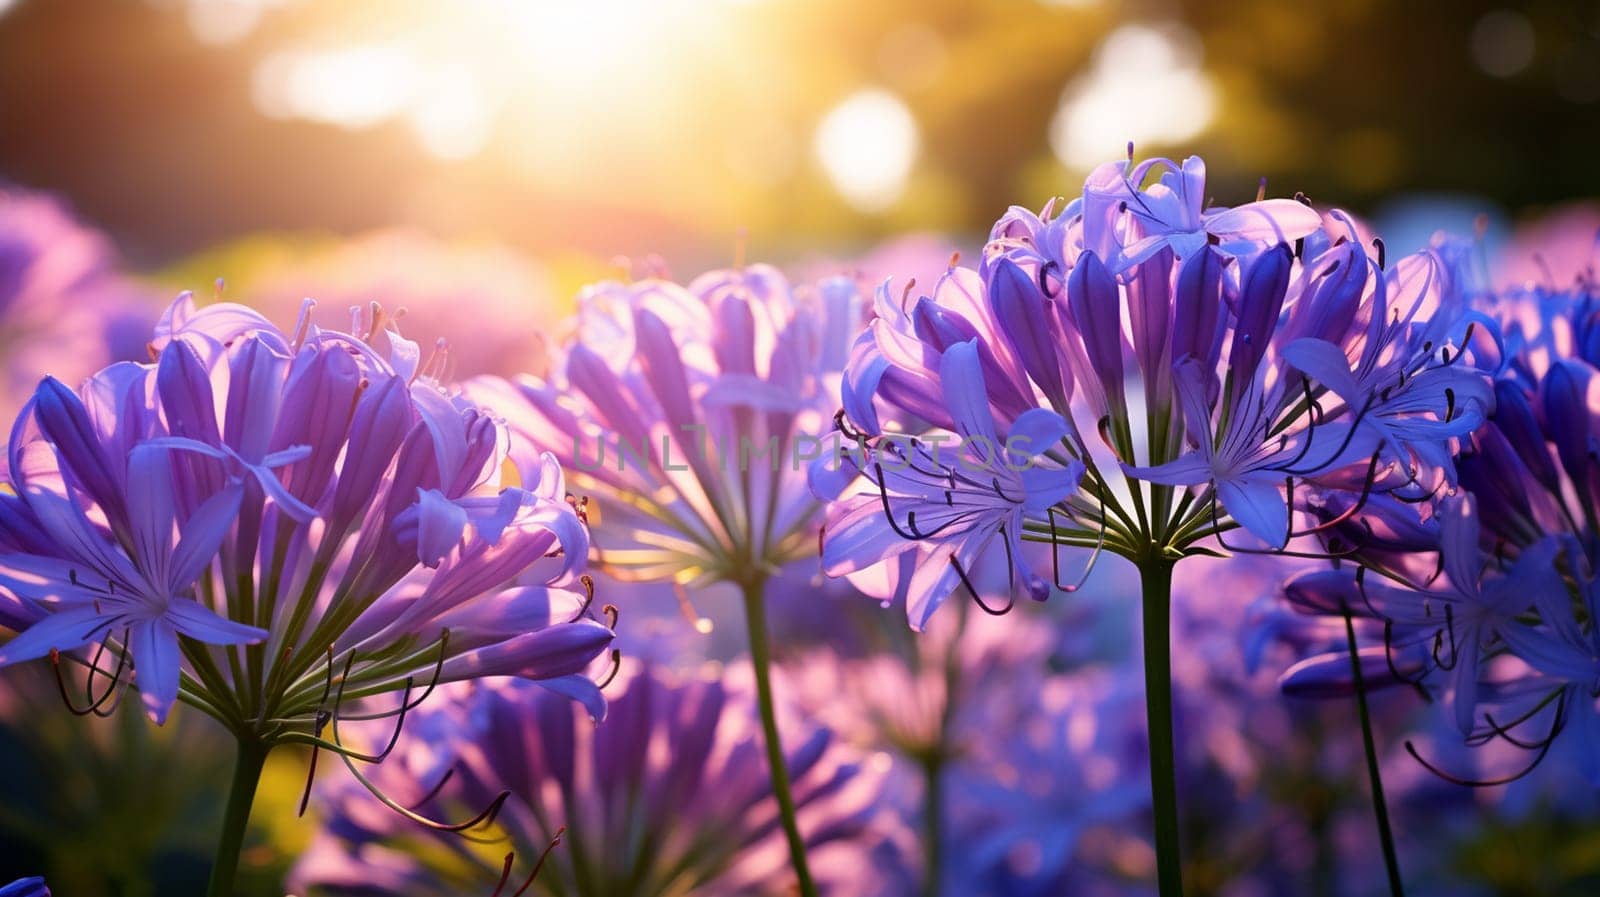 Agapanthus africanus flower in the garden with sunlight. Generate AI by Mrsongrphc